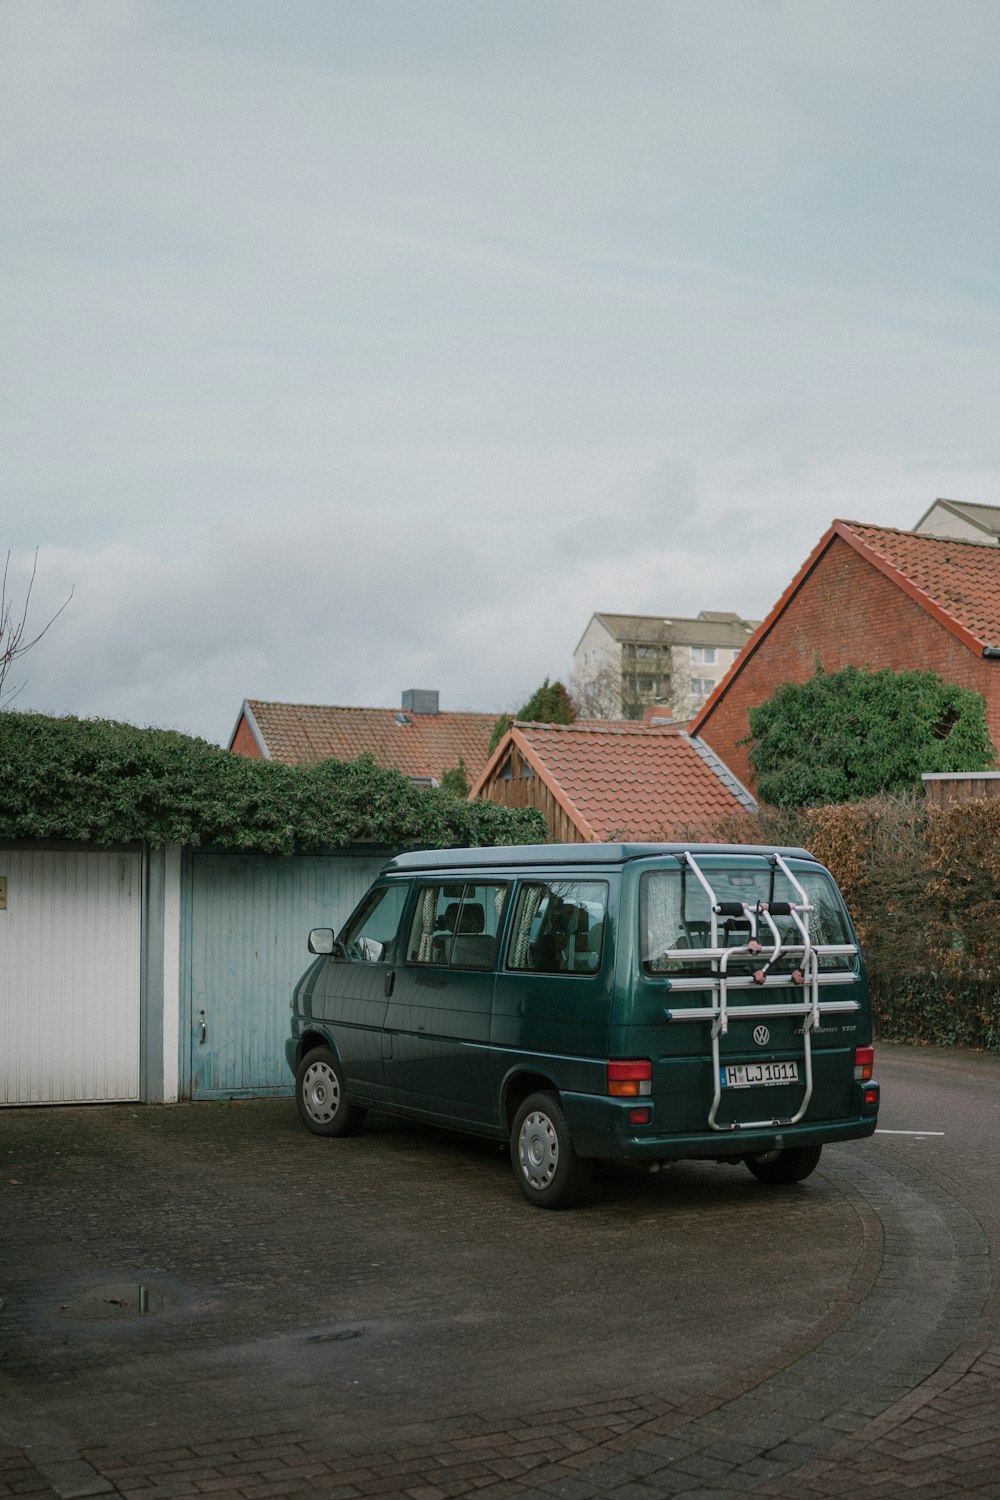 a green van parked in a driveway next to a house